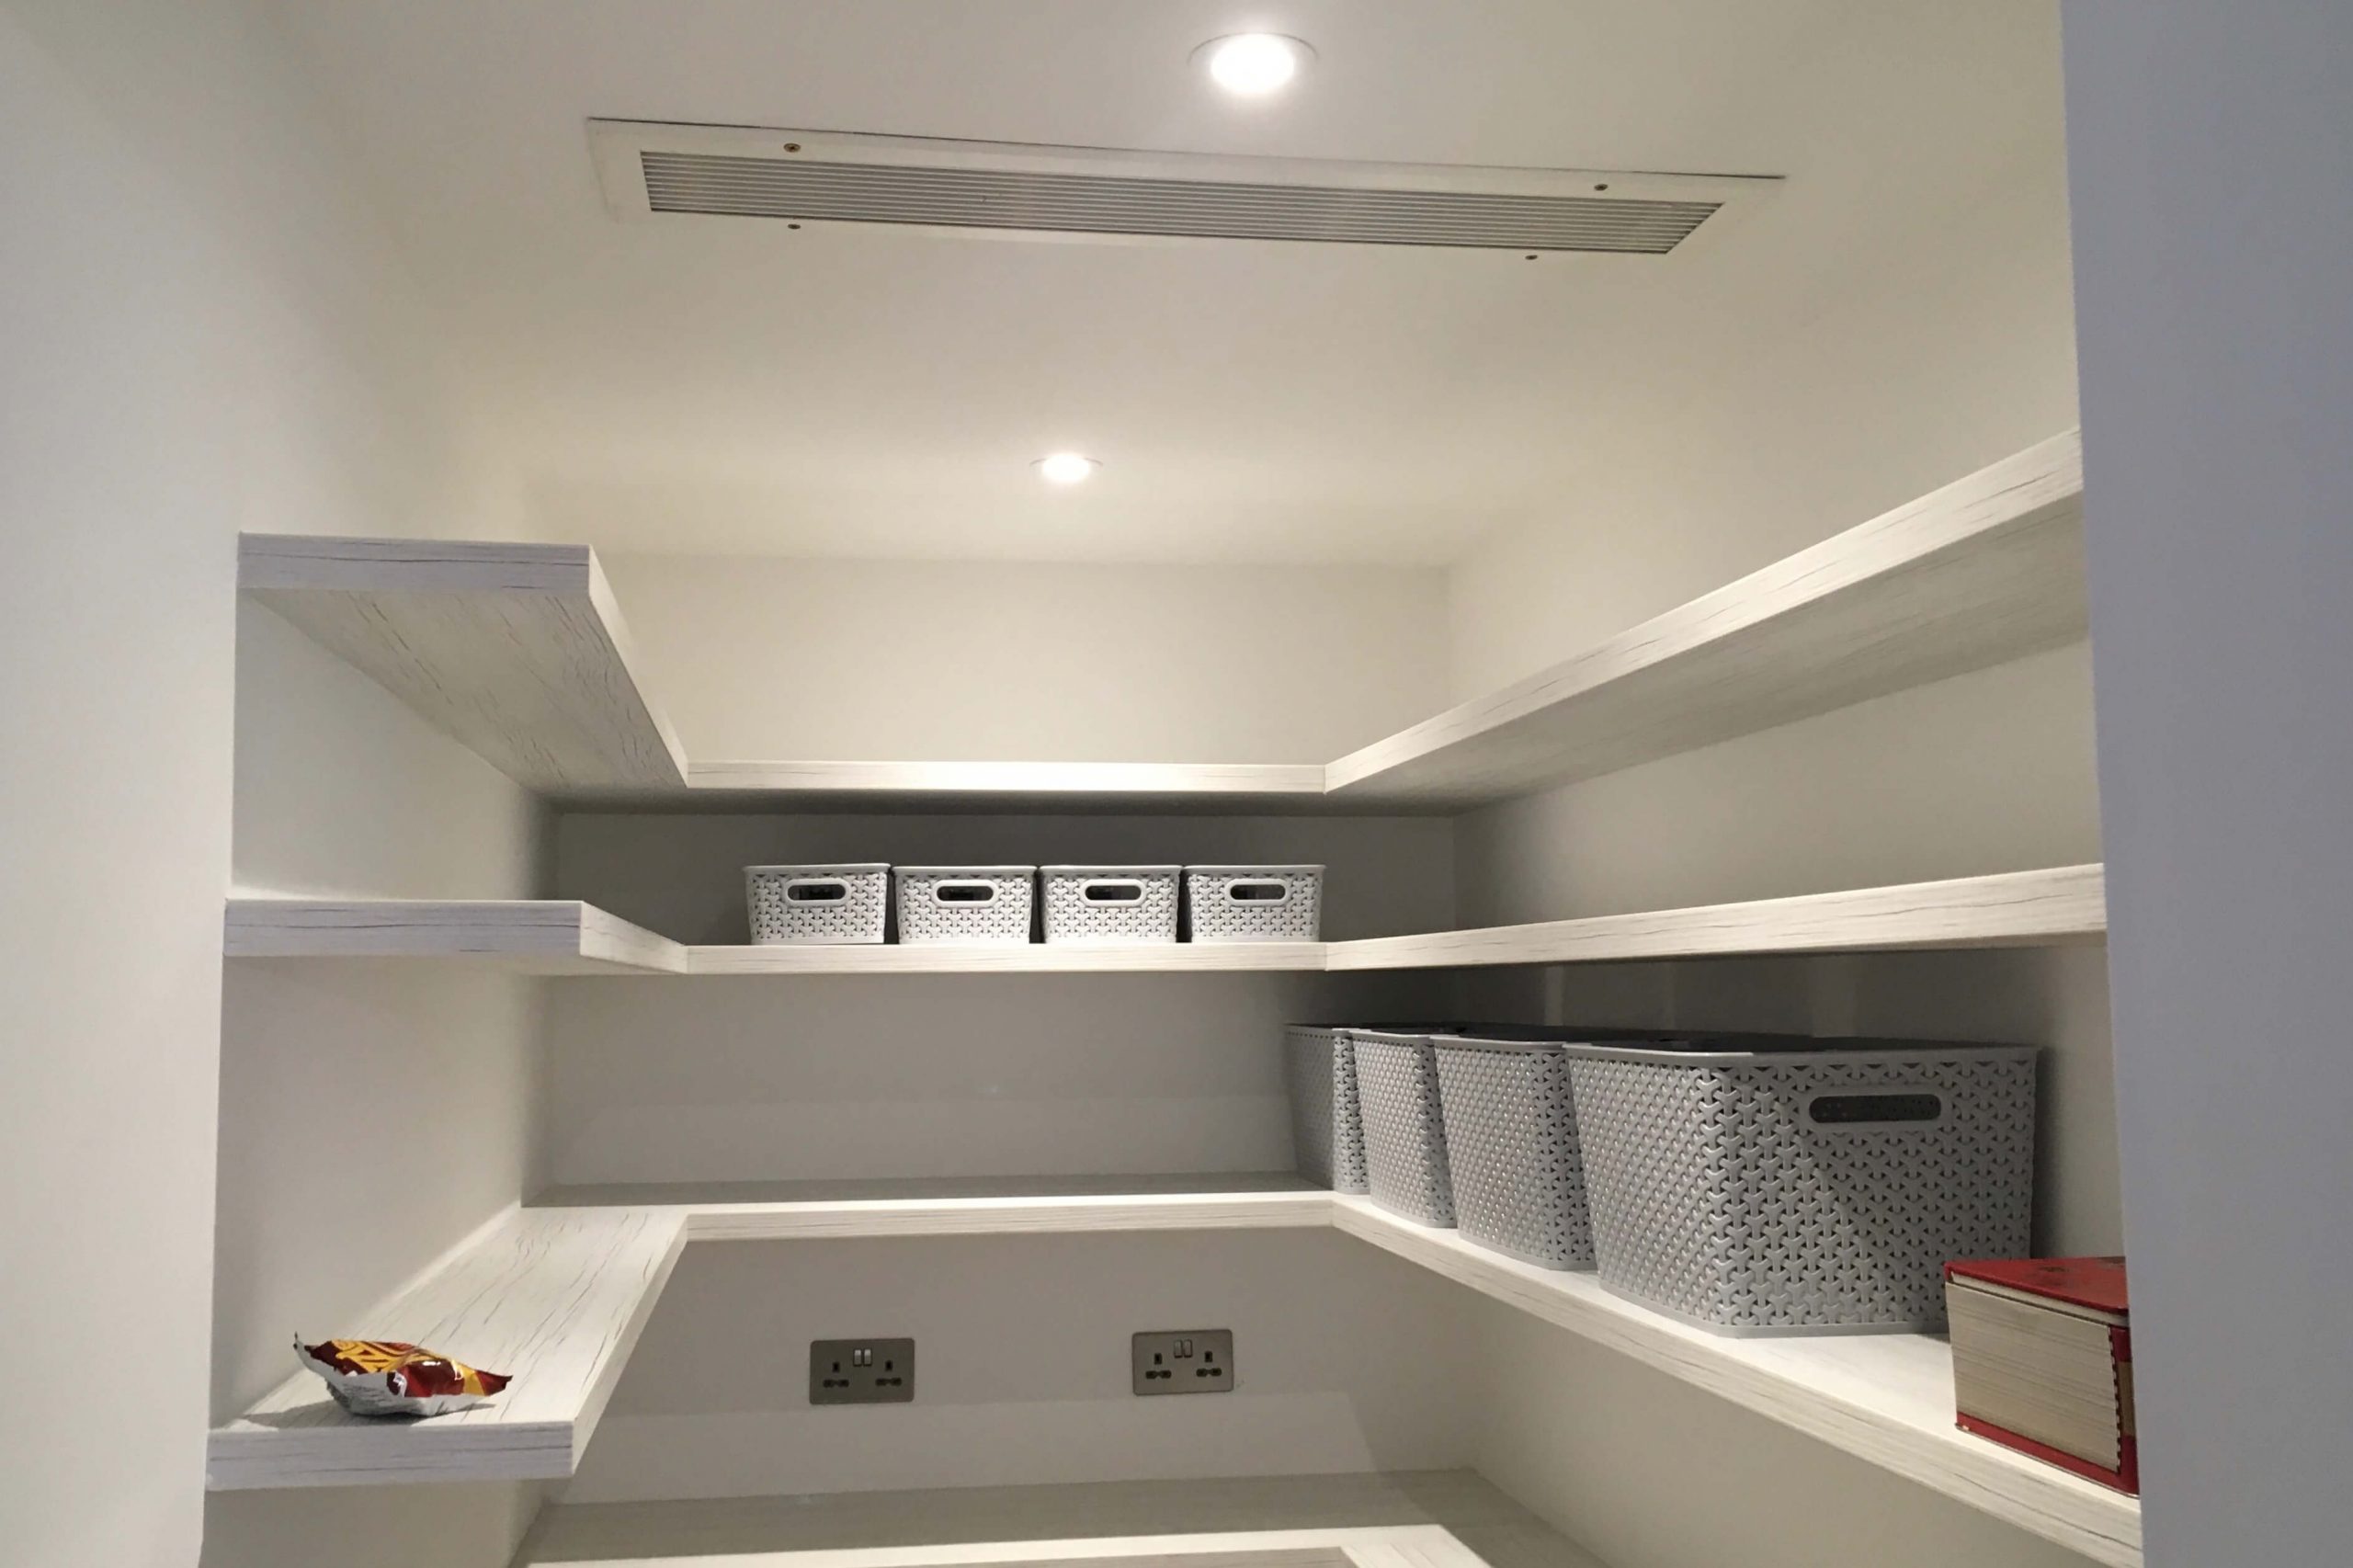 Scandia Hus with Mitsubishi air con and a full MVHR system by SubCool FM - inside the hidden chill room / larder